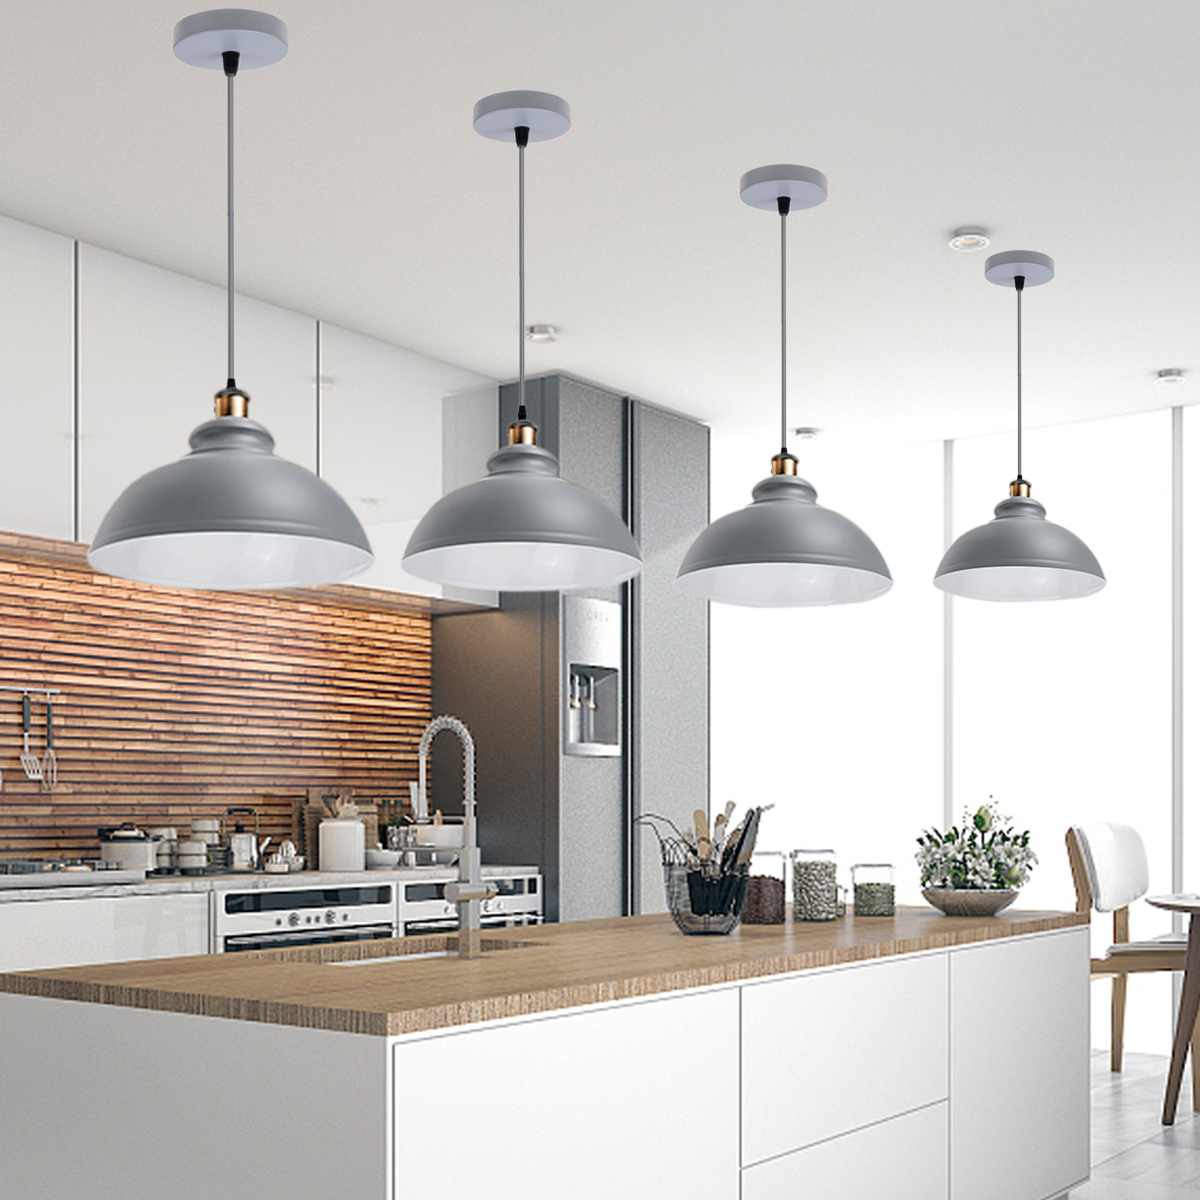 Retro-Metal-Pendant-Lampshade-Ceiling-Light-Shade-Modern-Industrial-Kitchen-Bar-Table-Chandelier-1795919-12